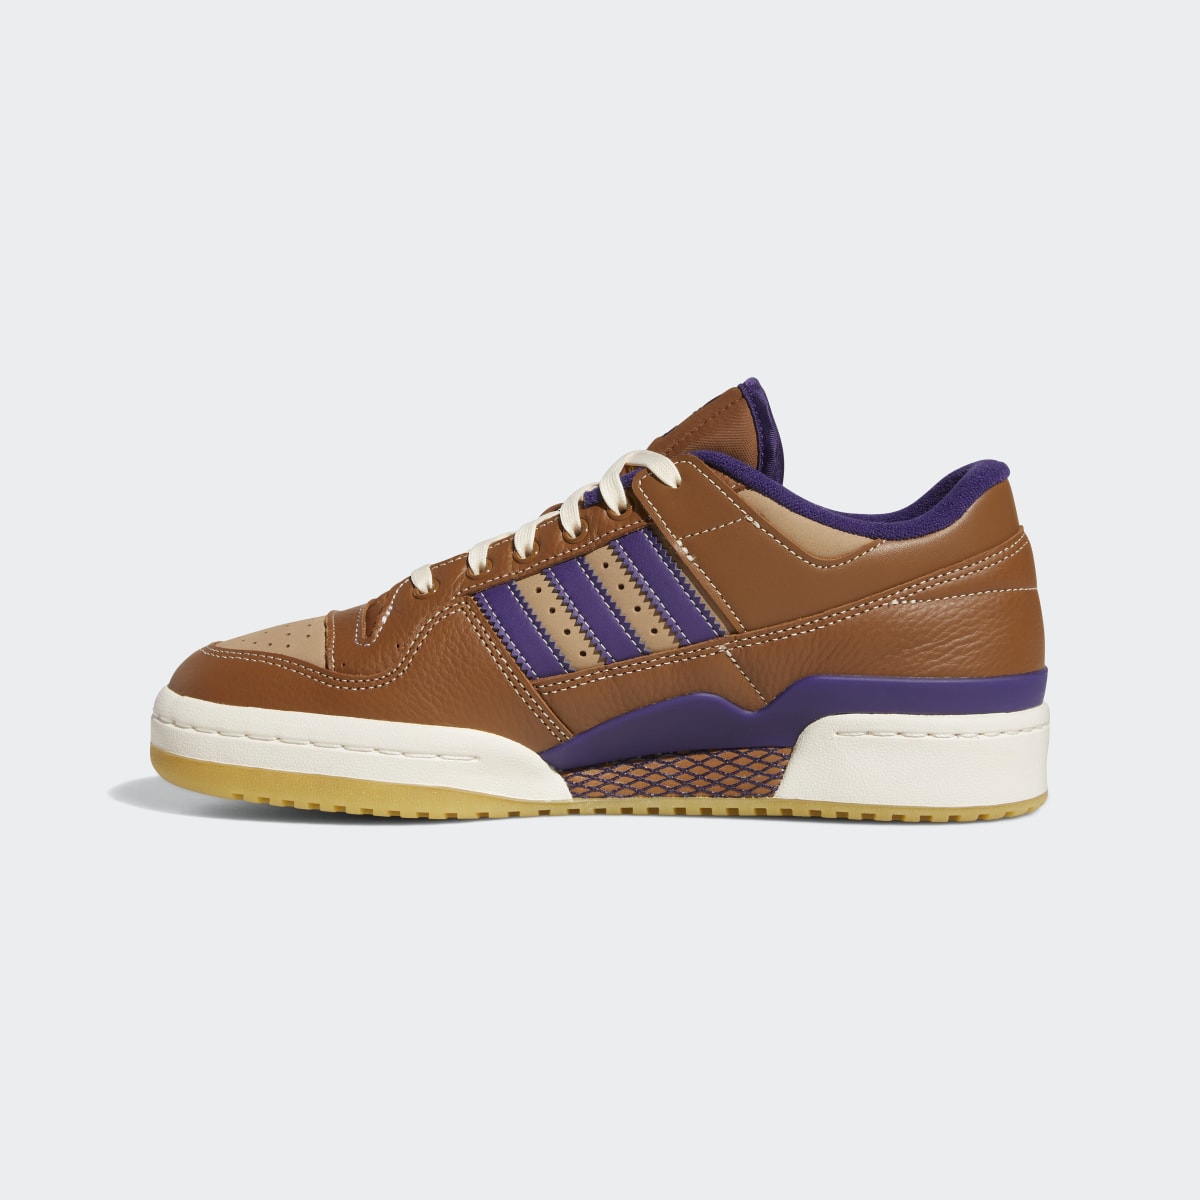 Adidas Heitor Forum 84 Low ADV Shoes. 9